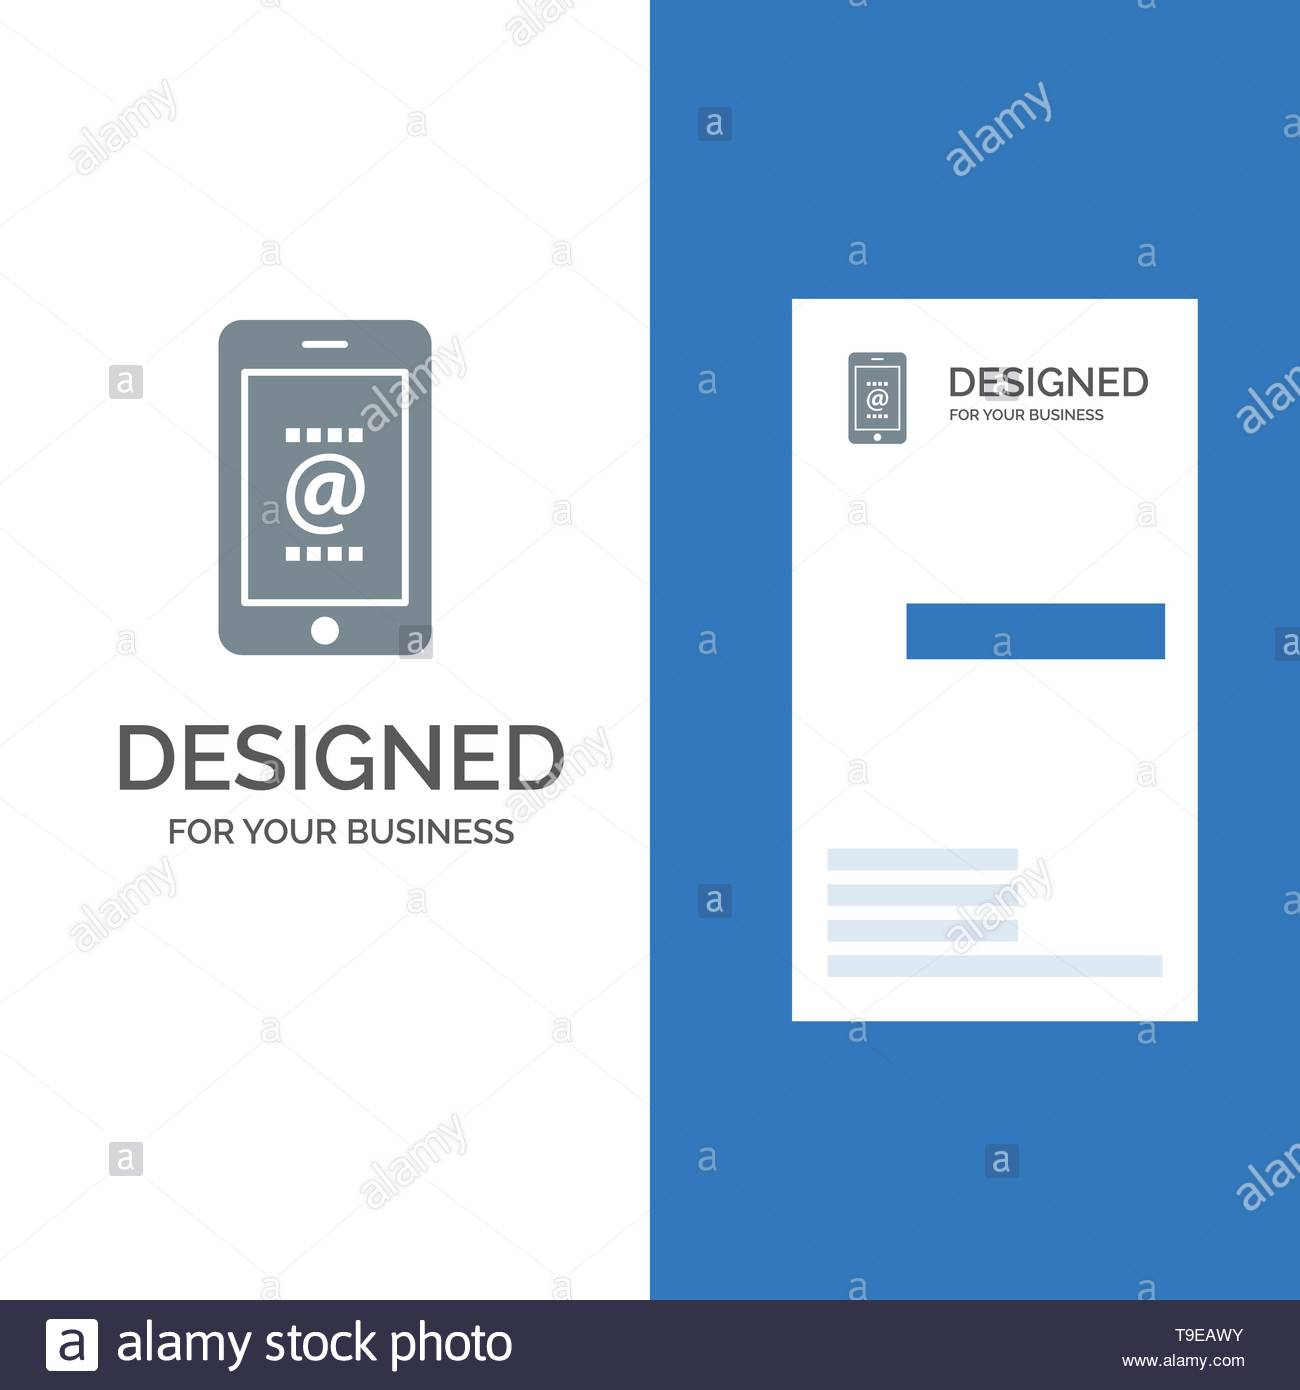 Personal Id Card Stock Photos & Personal Id Card Stock Inside Personal Identification Card Template